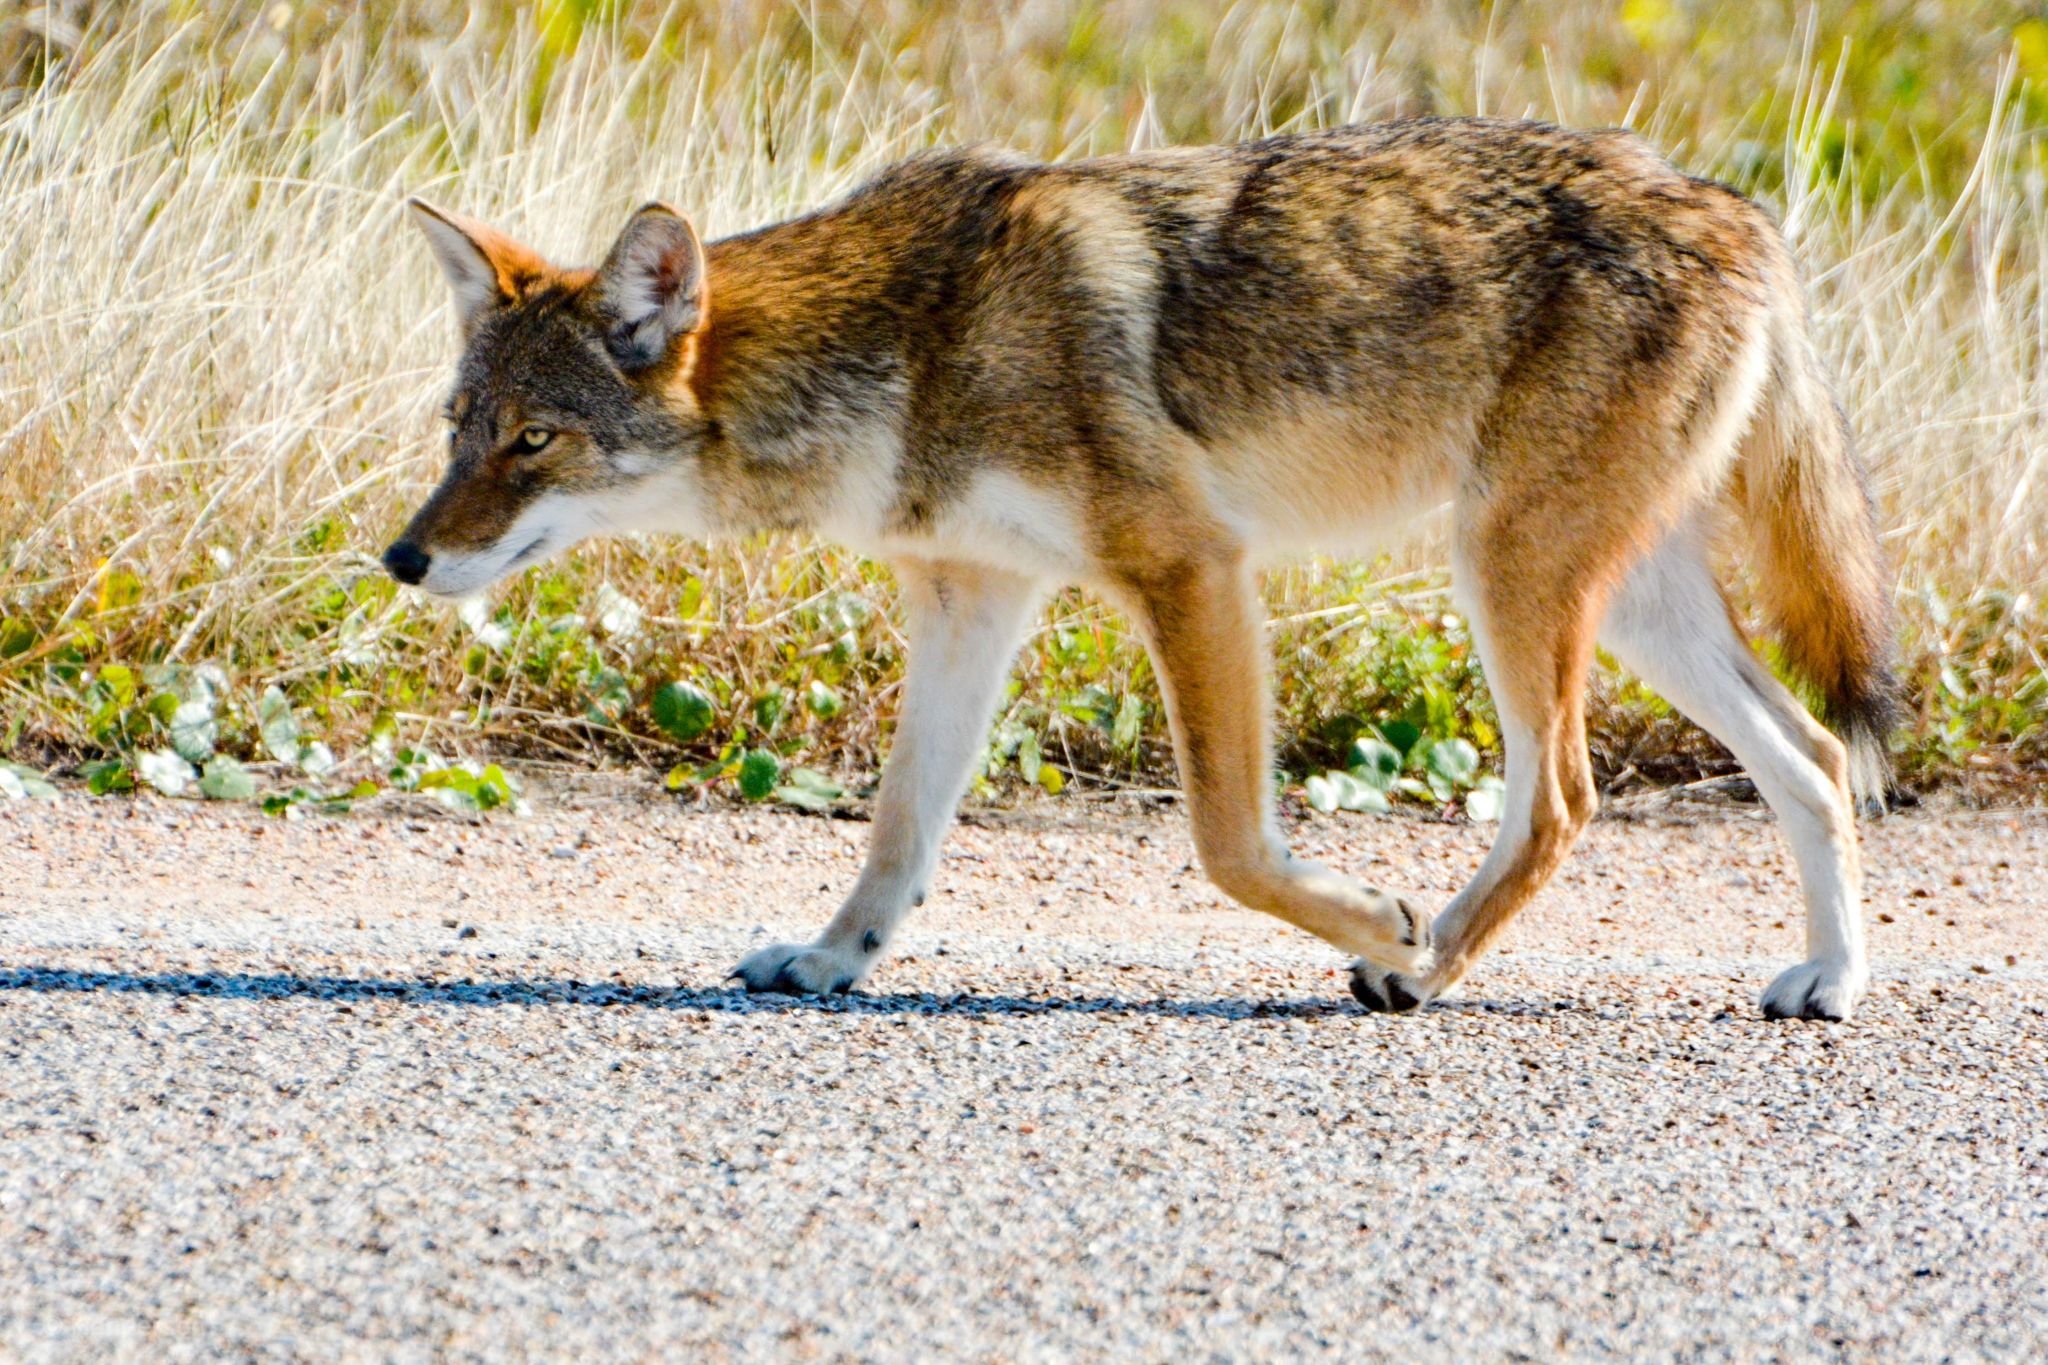 Researchers hope Galveston stays supportive of its coyotes